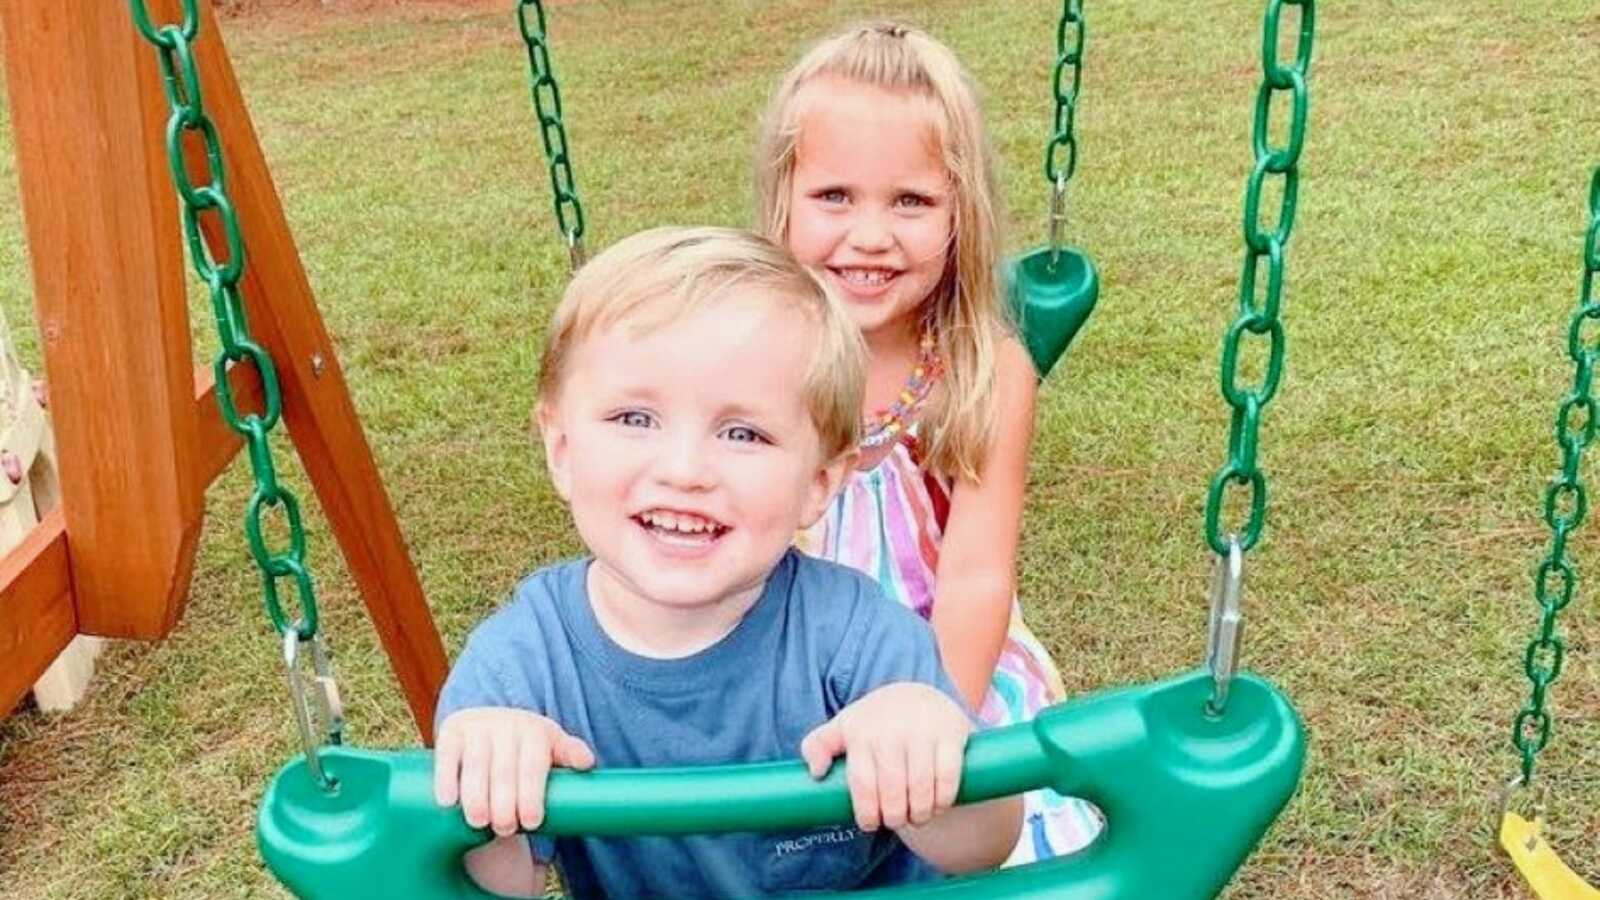 Brother and sister enjoy outside time on a swing together